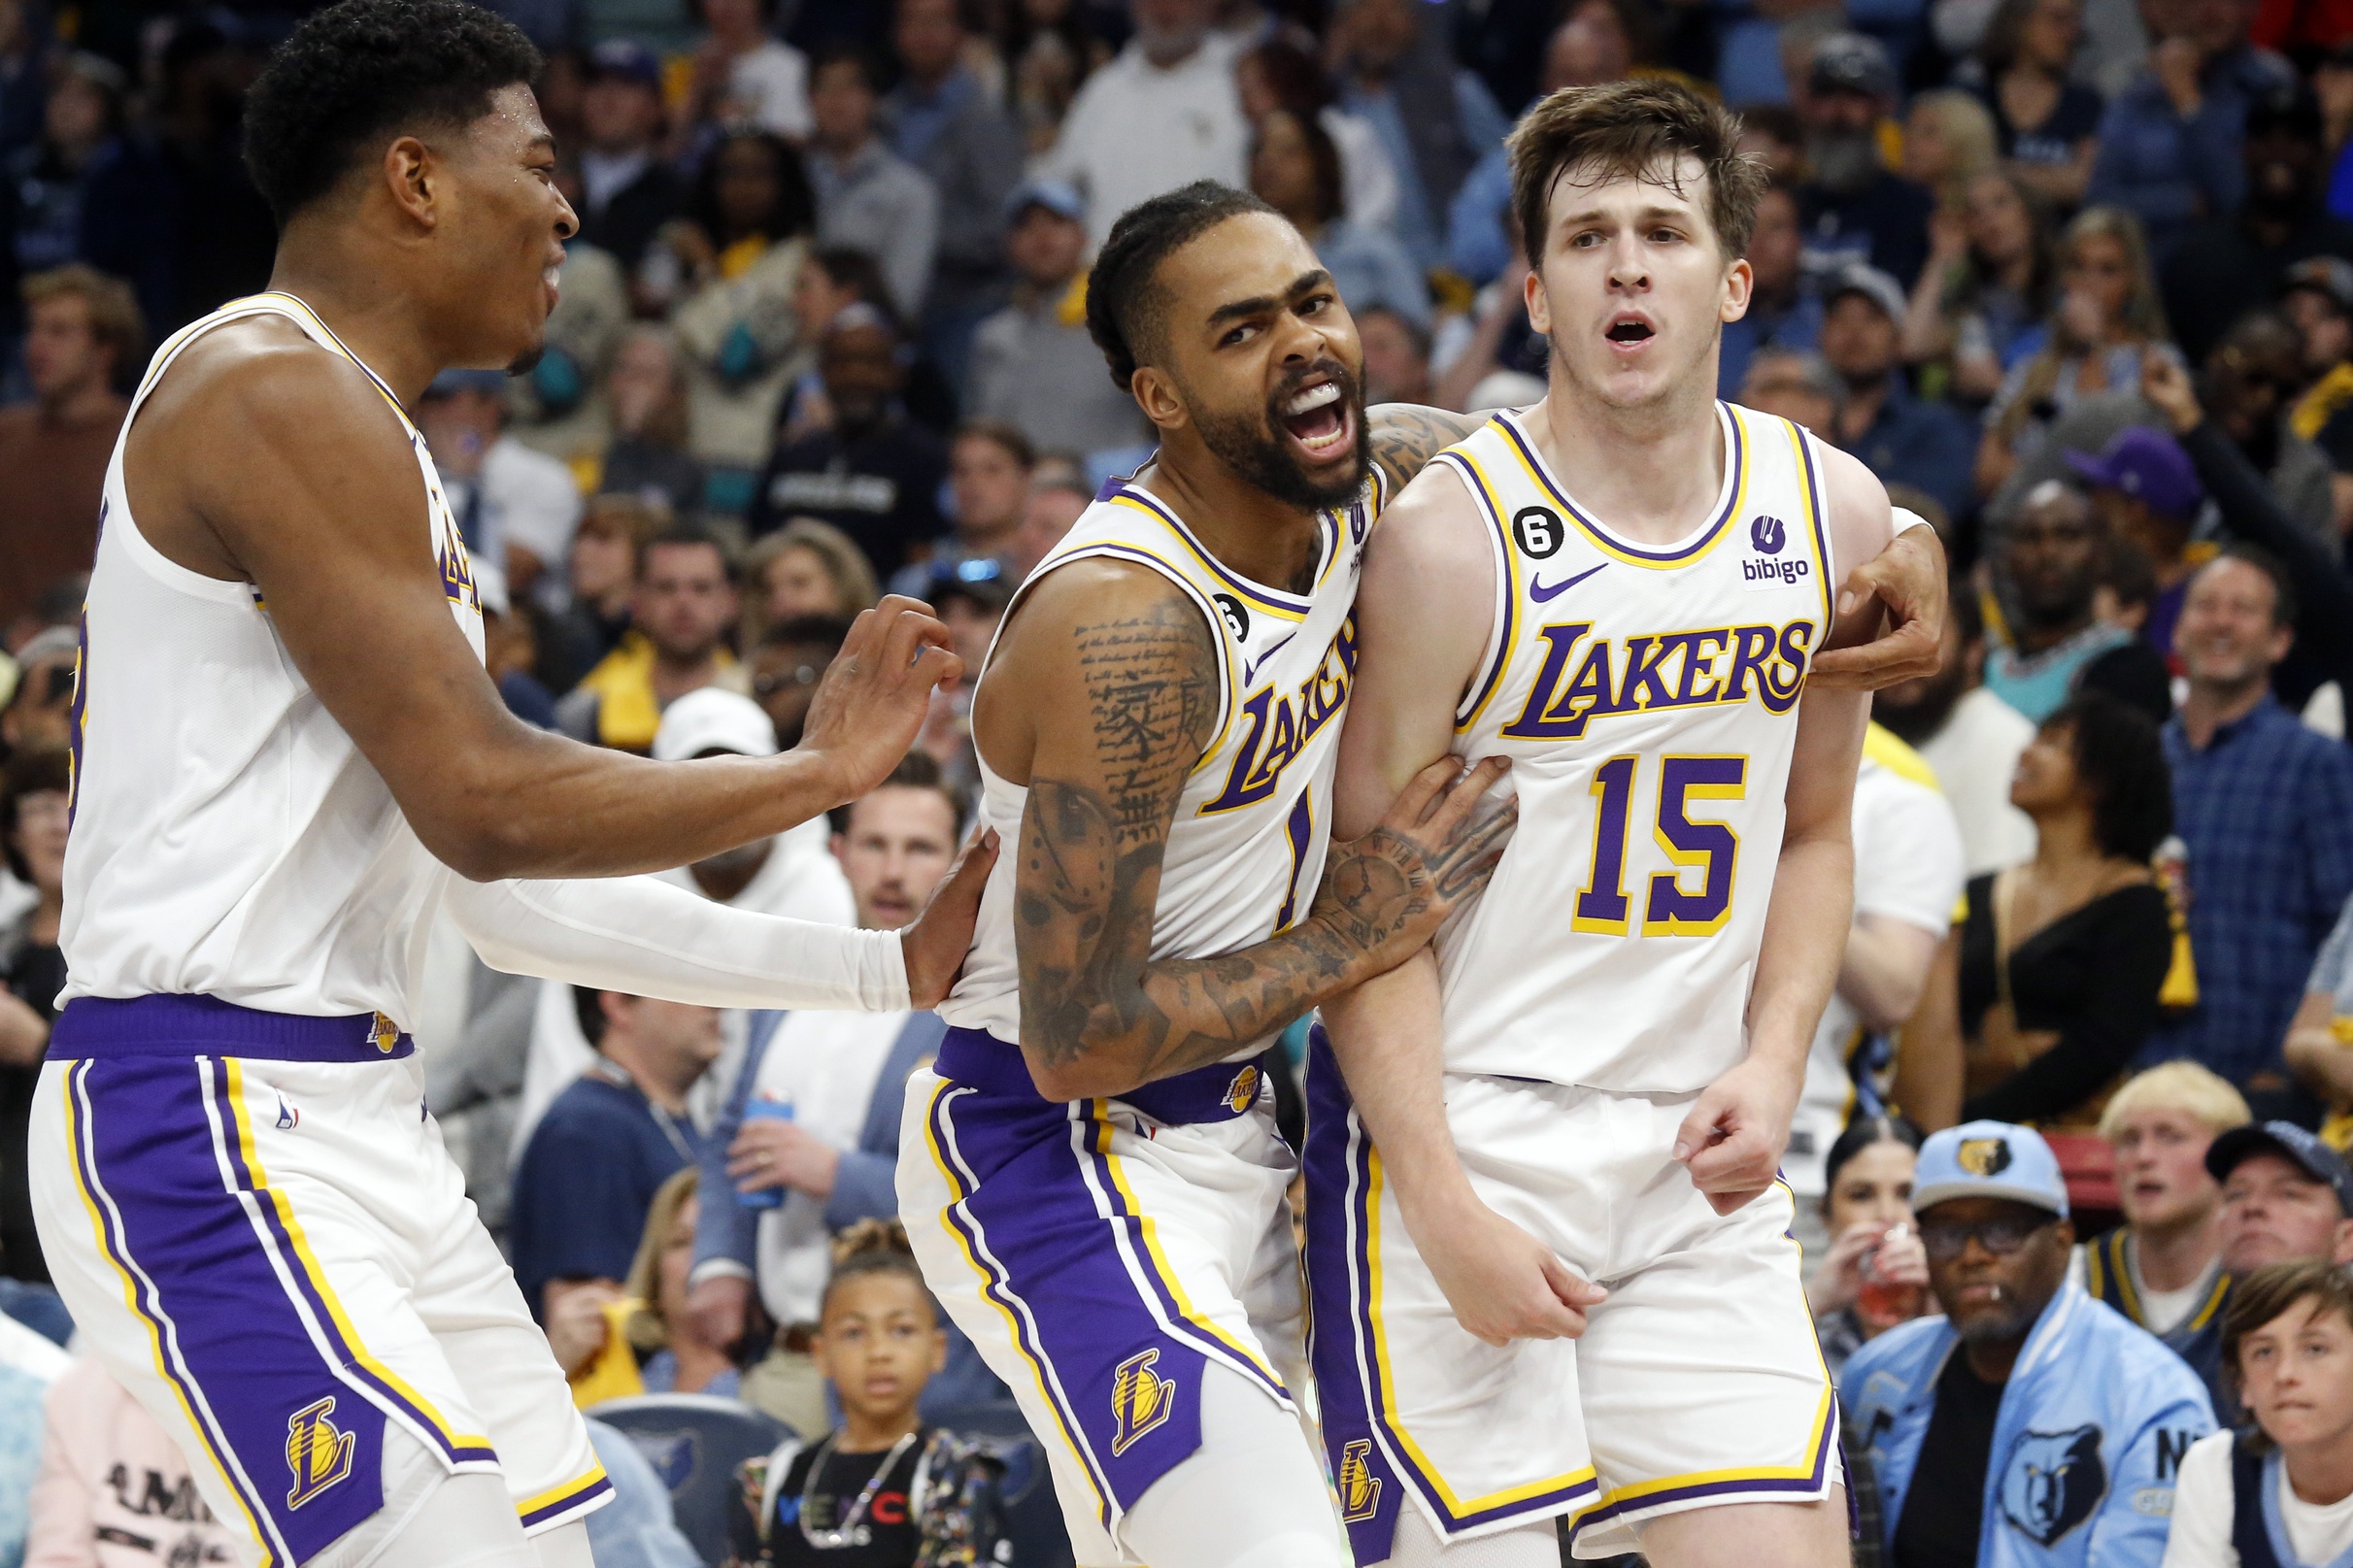 Apr 16, 2023; Memphis, Tennessee, USA; Los Angeles Lakers forward Rui Hachimura (28) and guard D'Angelo Russell (1) react with guard Austin Reaves (15) during the second half during game one of the 2023 NBA playoffs against the Memphis Grizzlies at FedExForum. Mandatory Credit: Petre Thomas-USA TODAY Sports